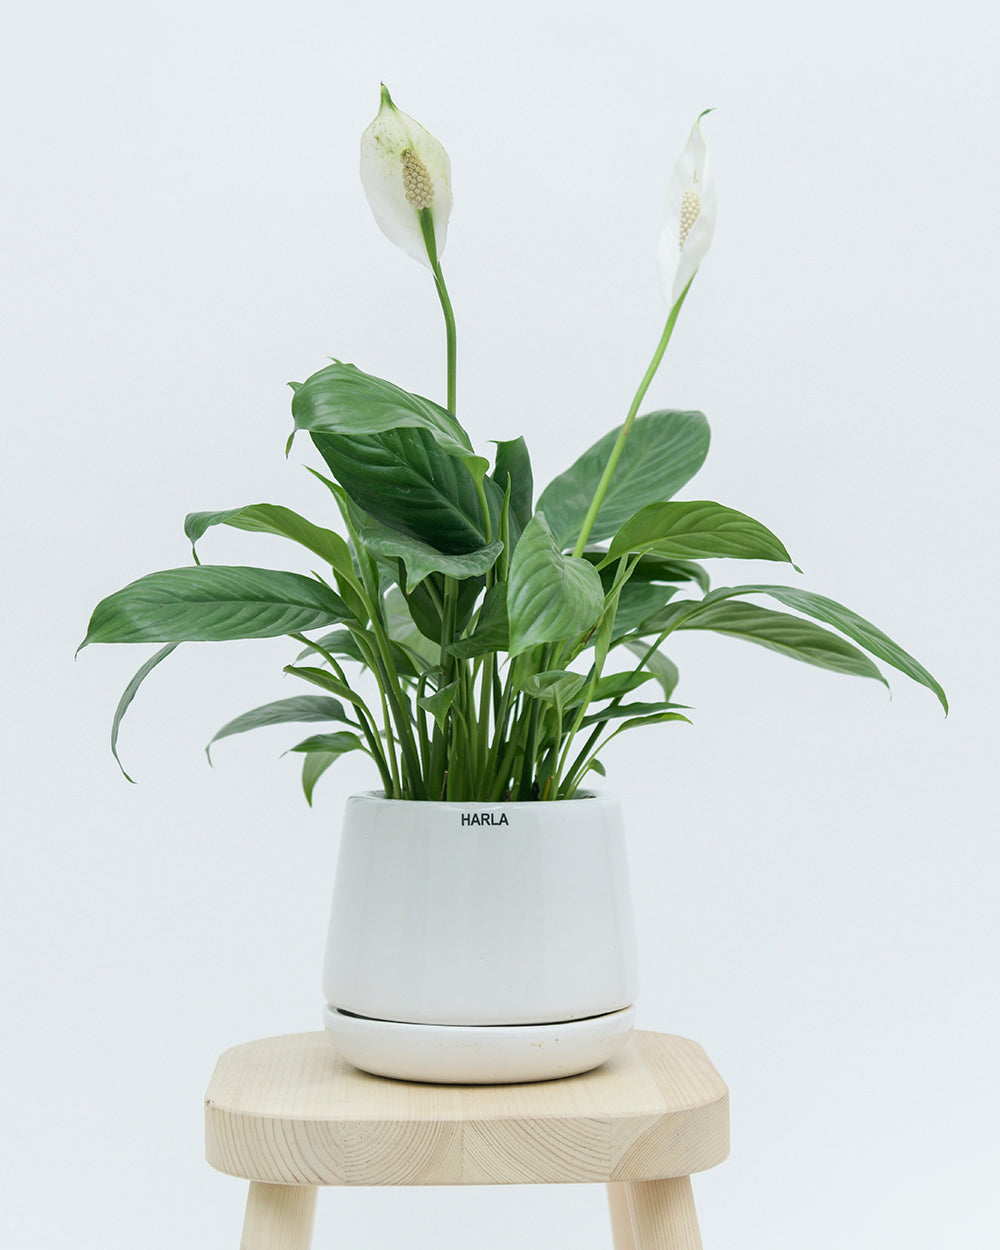 Extra Small size Monsoon Medley ceramic planter in white color with Peace Lilly plant placed on the stool.